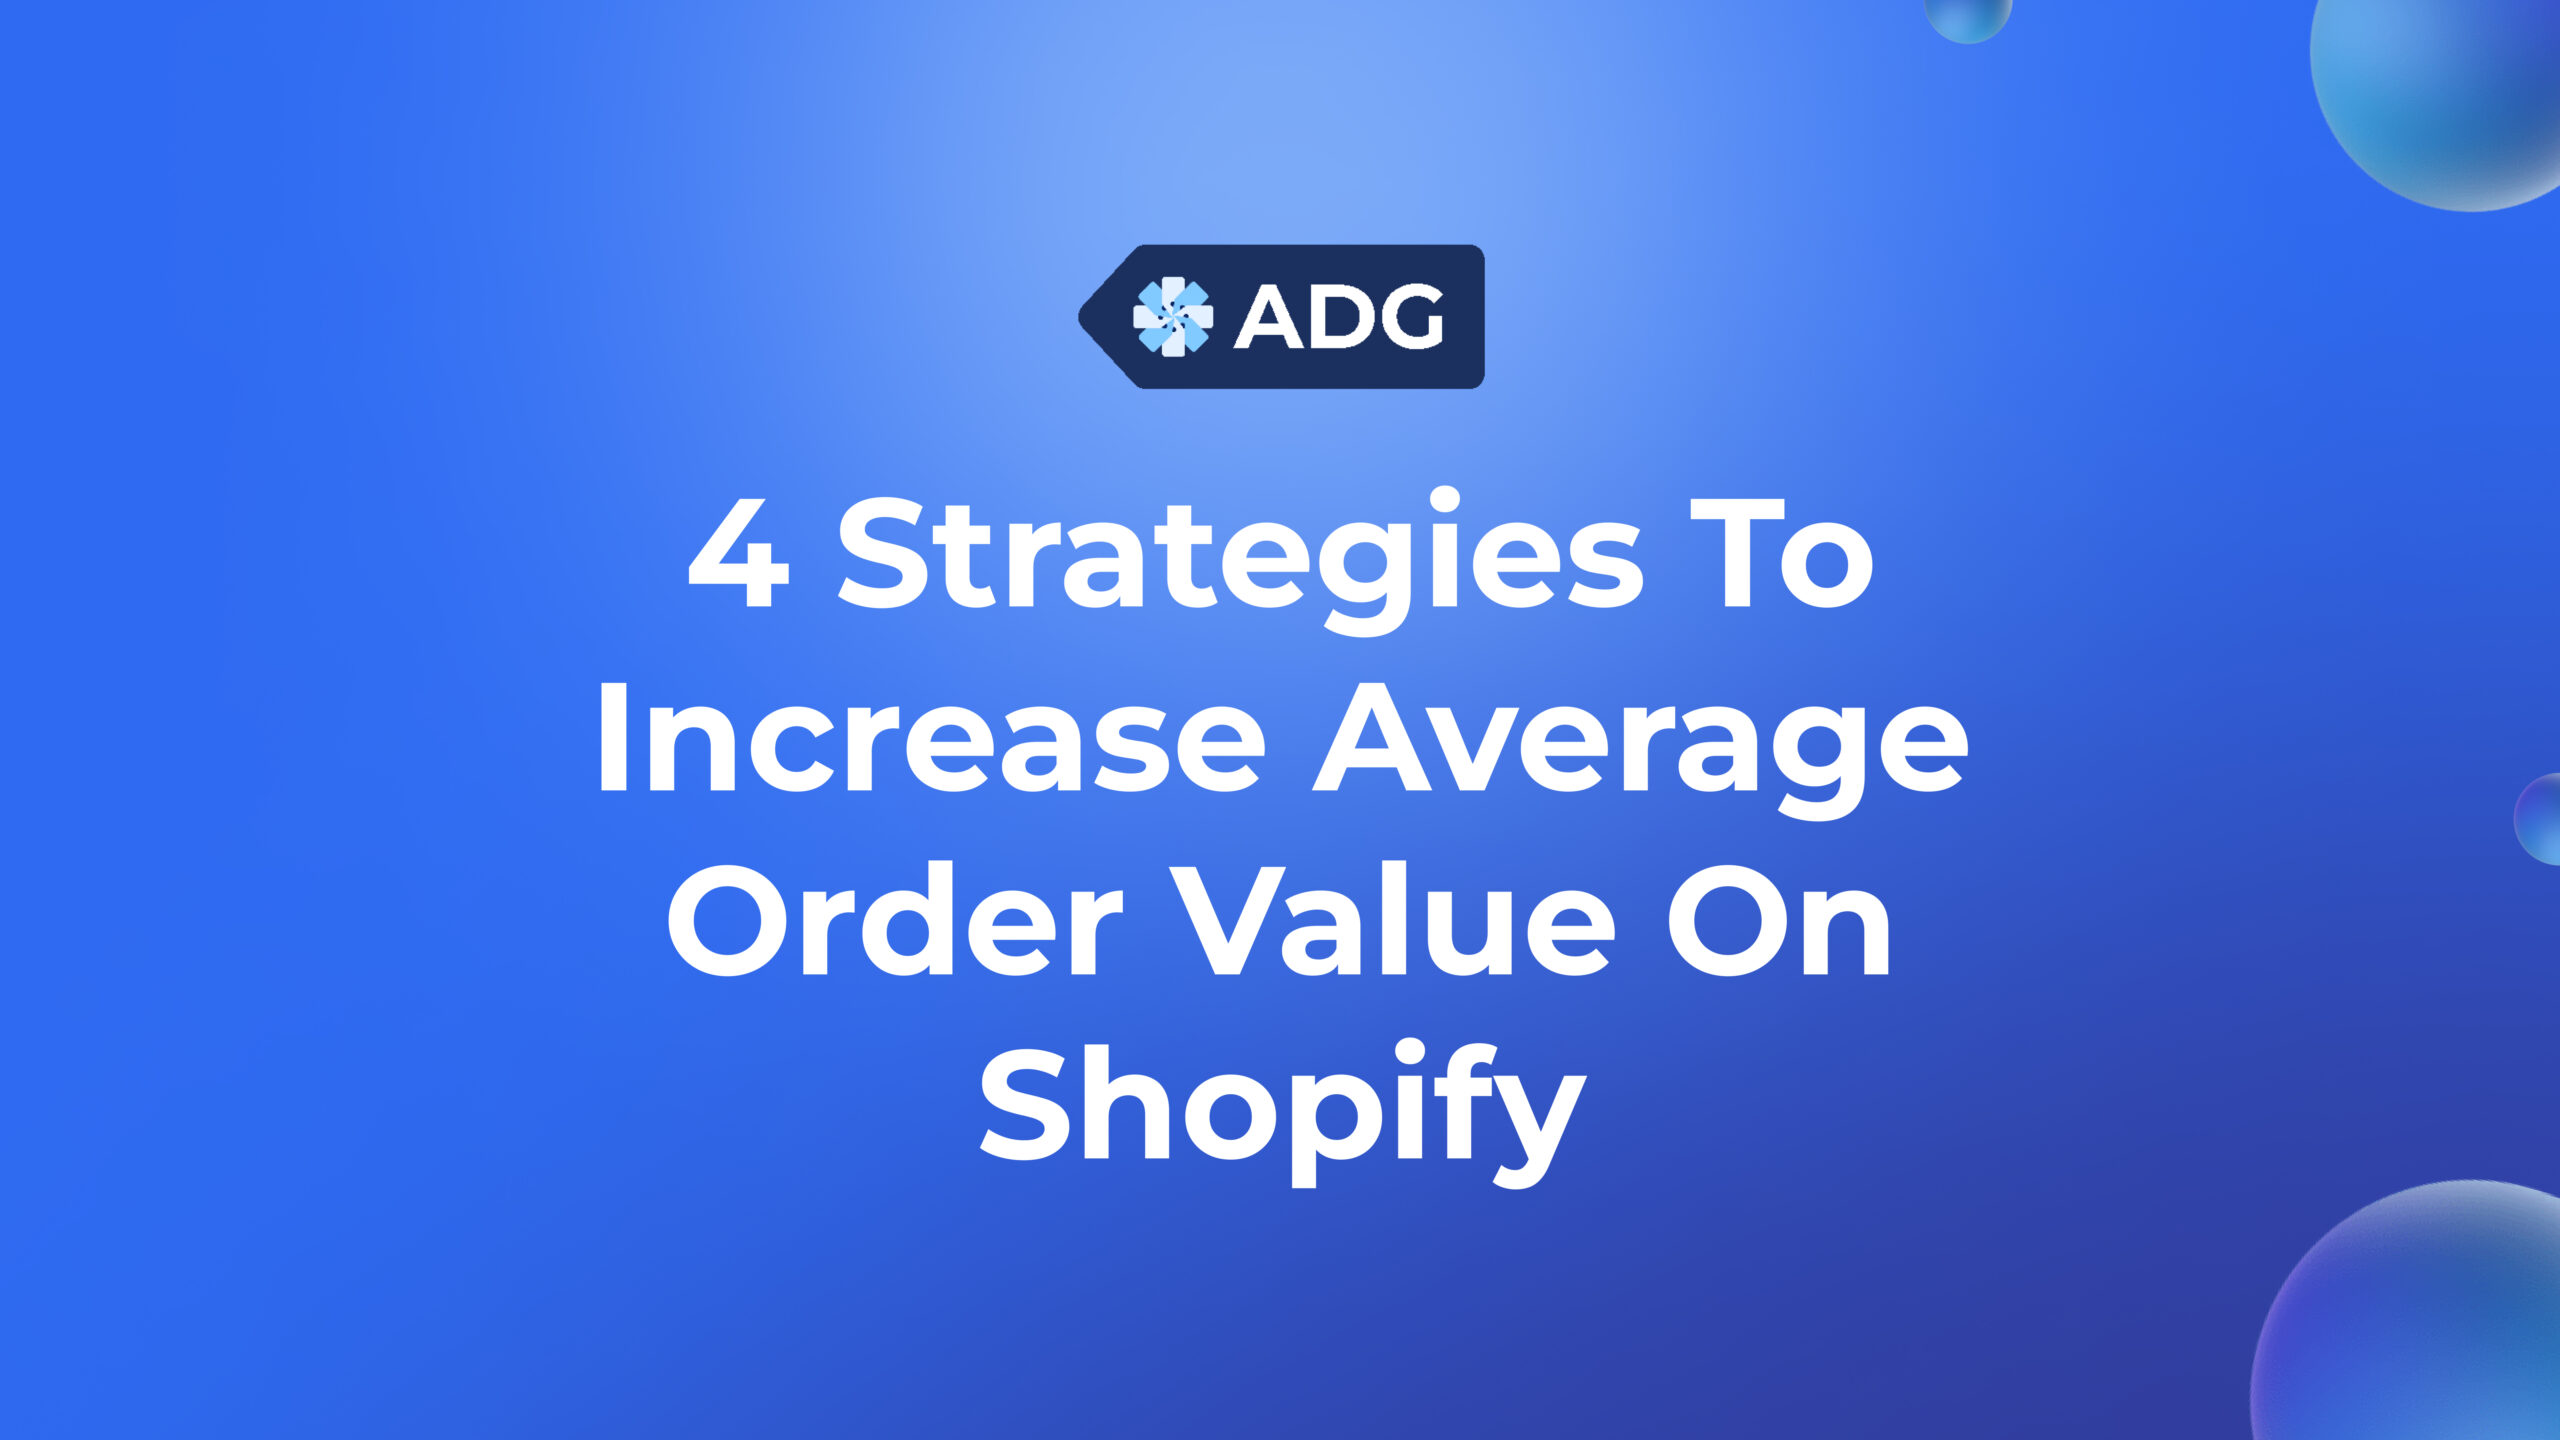 The blog card The Power Of Upselling: 4 Strategies To Increase Average Order Value On Shopify